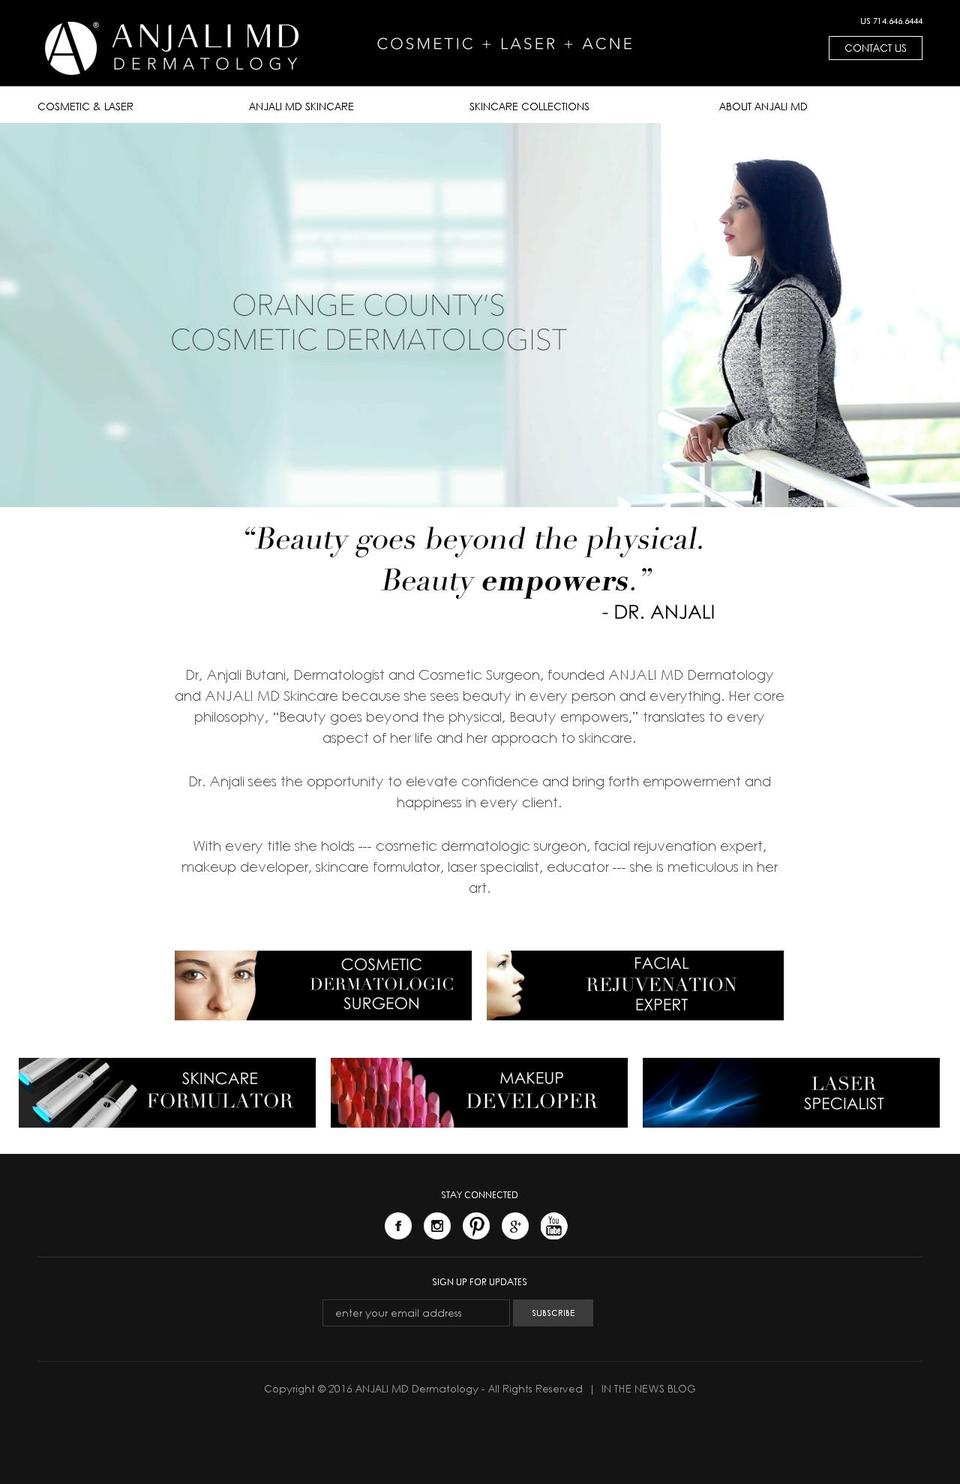 Anjali MD Site 2016 Shopify theme site example oclaserfacelift.com